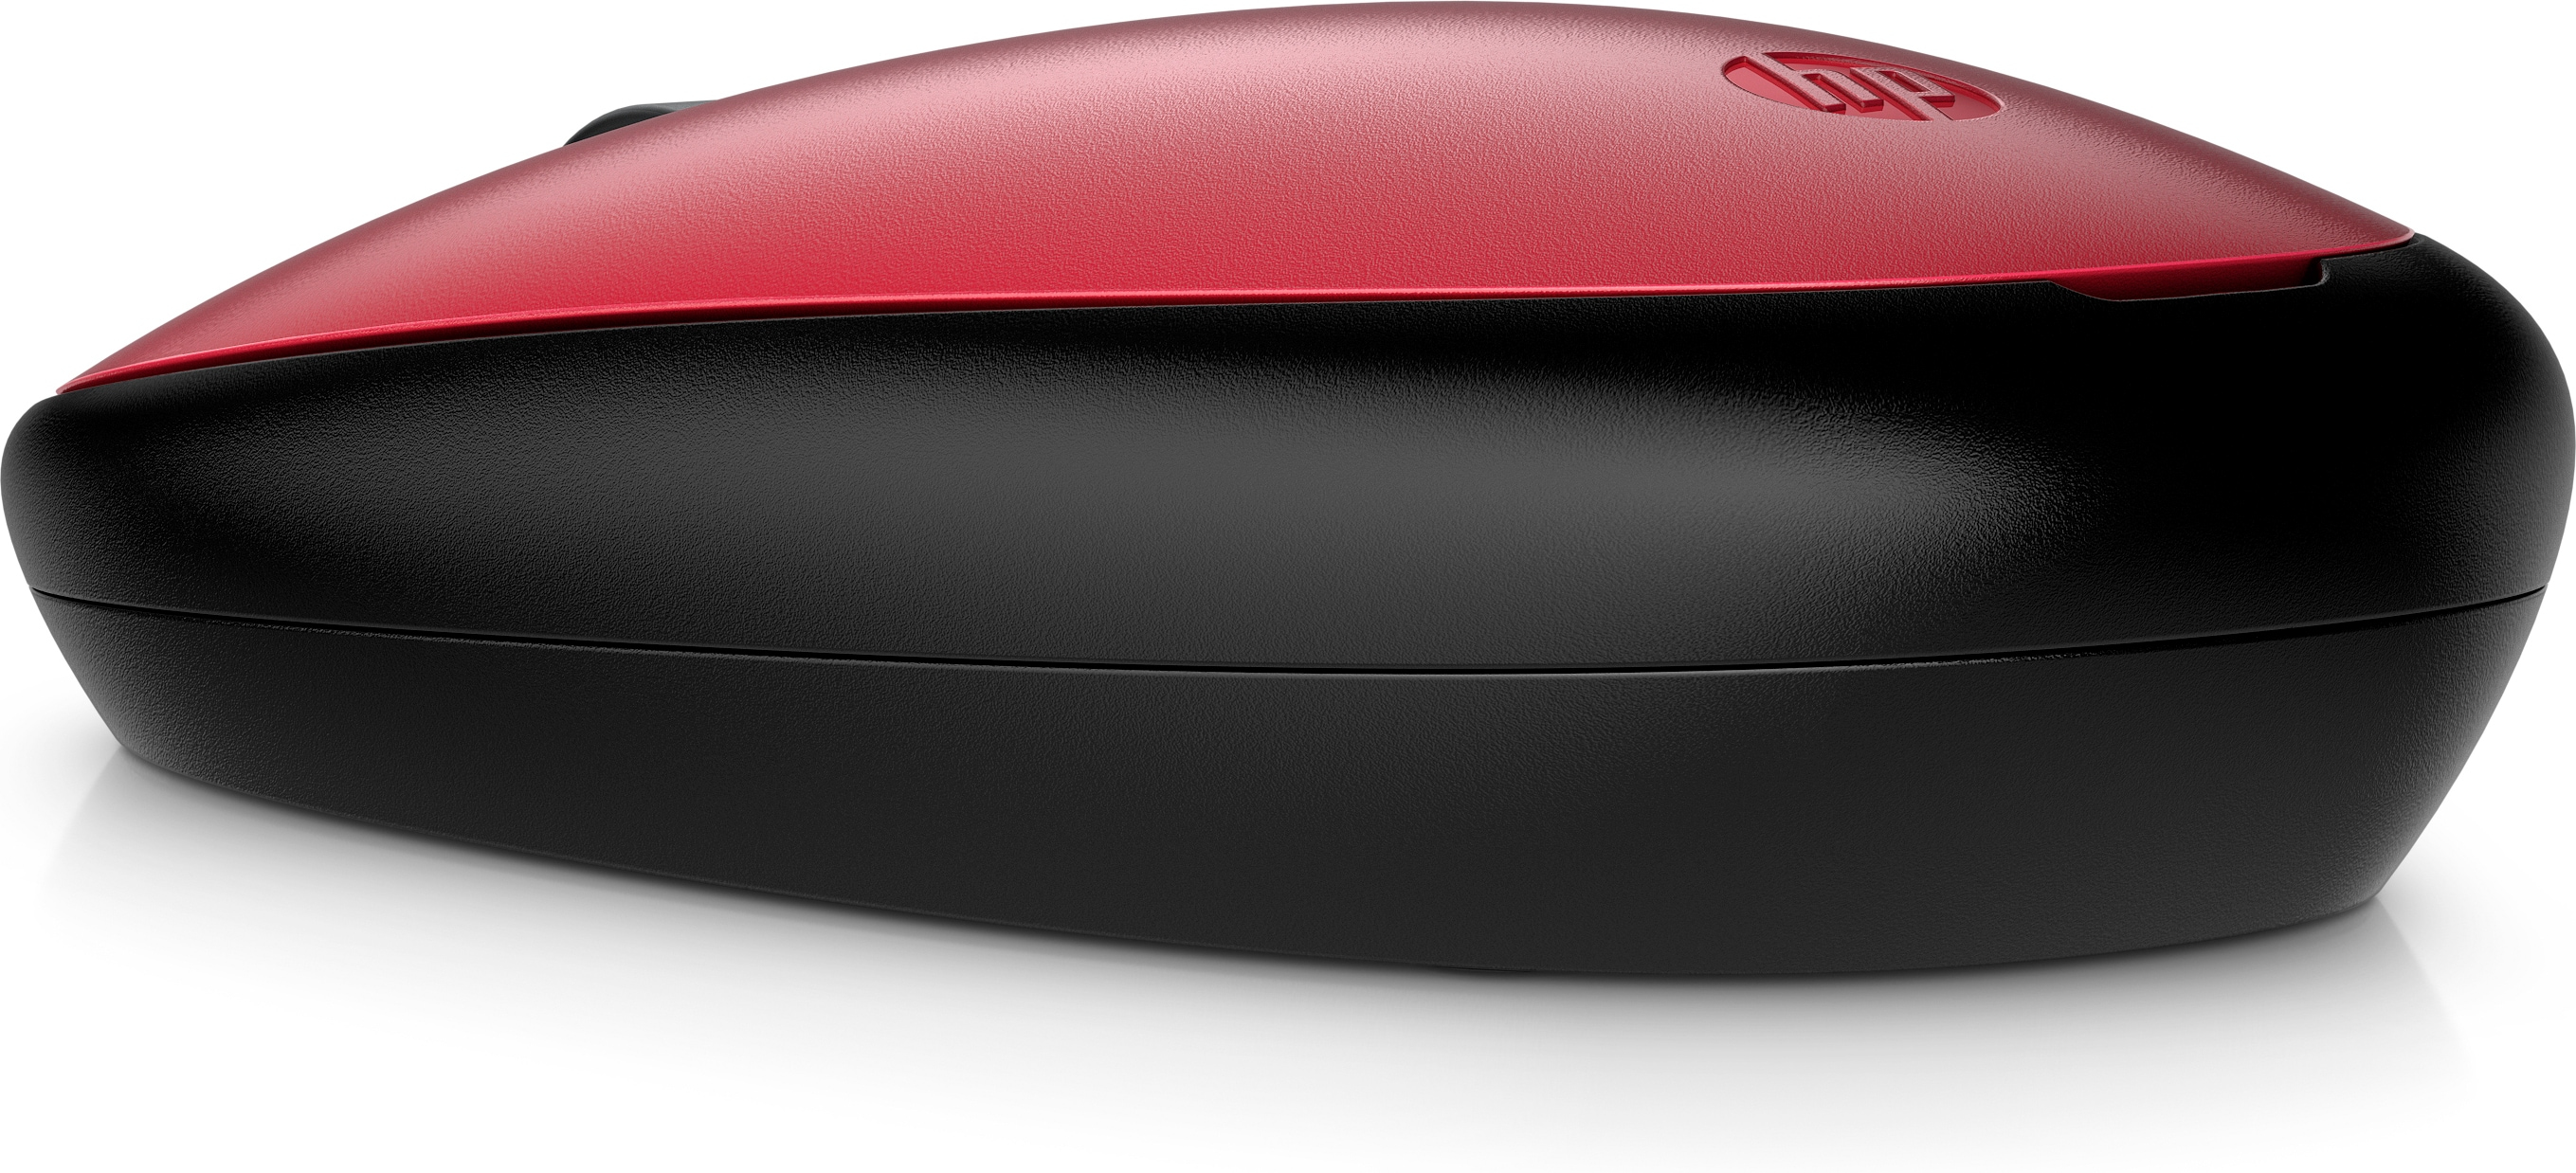 HP 240 Bluetooth Mouse – Red - HP Store UK